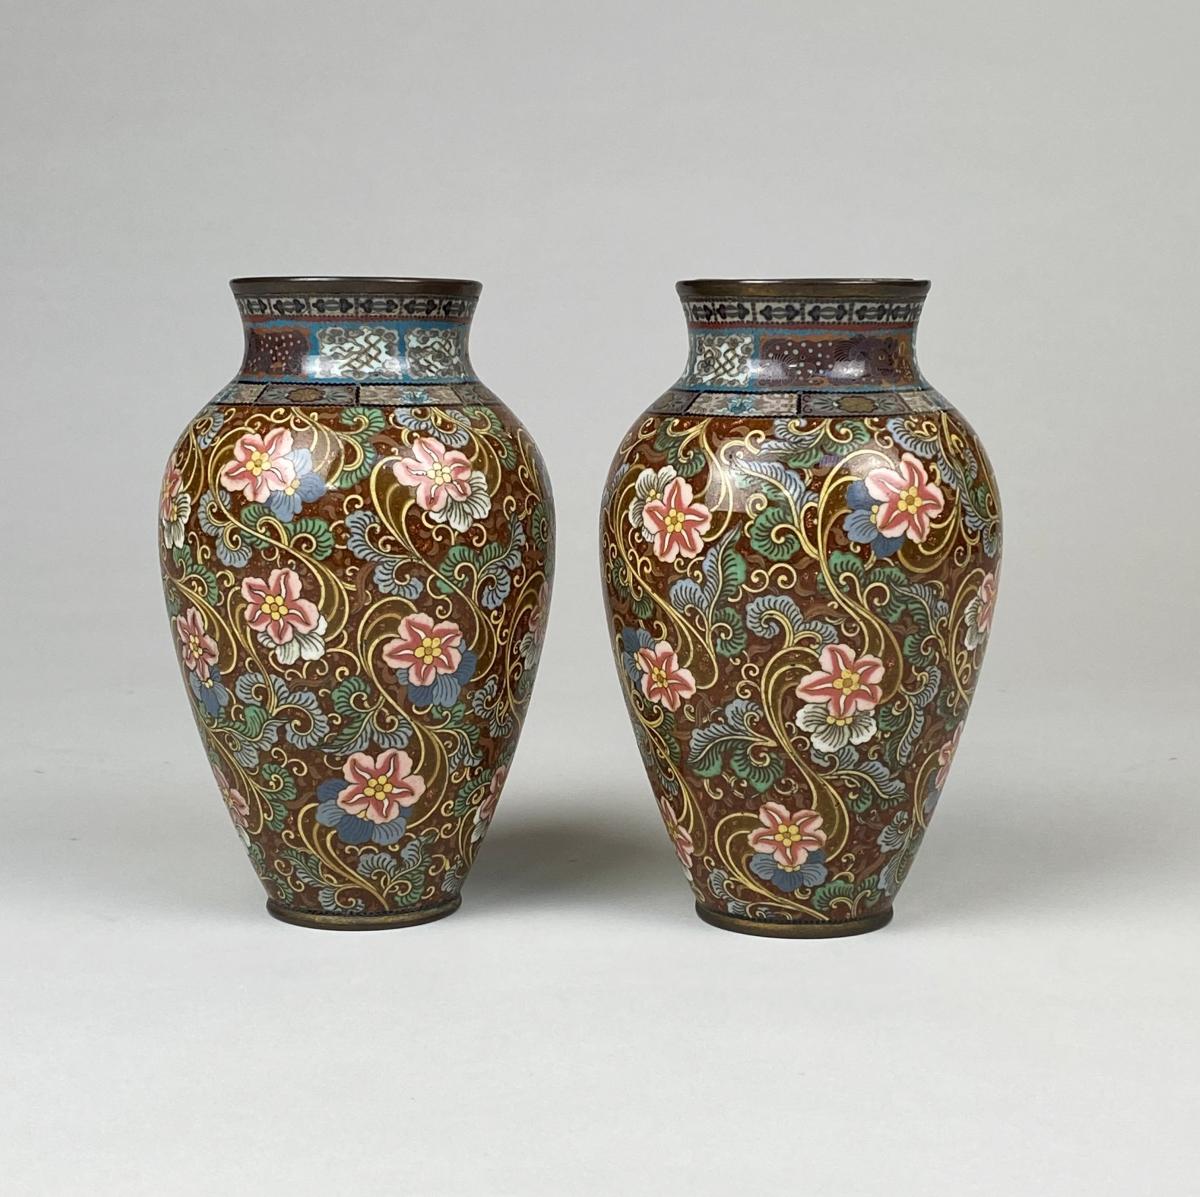 A small, yet dramatic pair of late 19th Century Japanese cloisonne vases